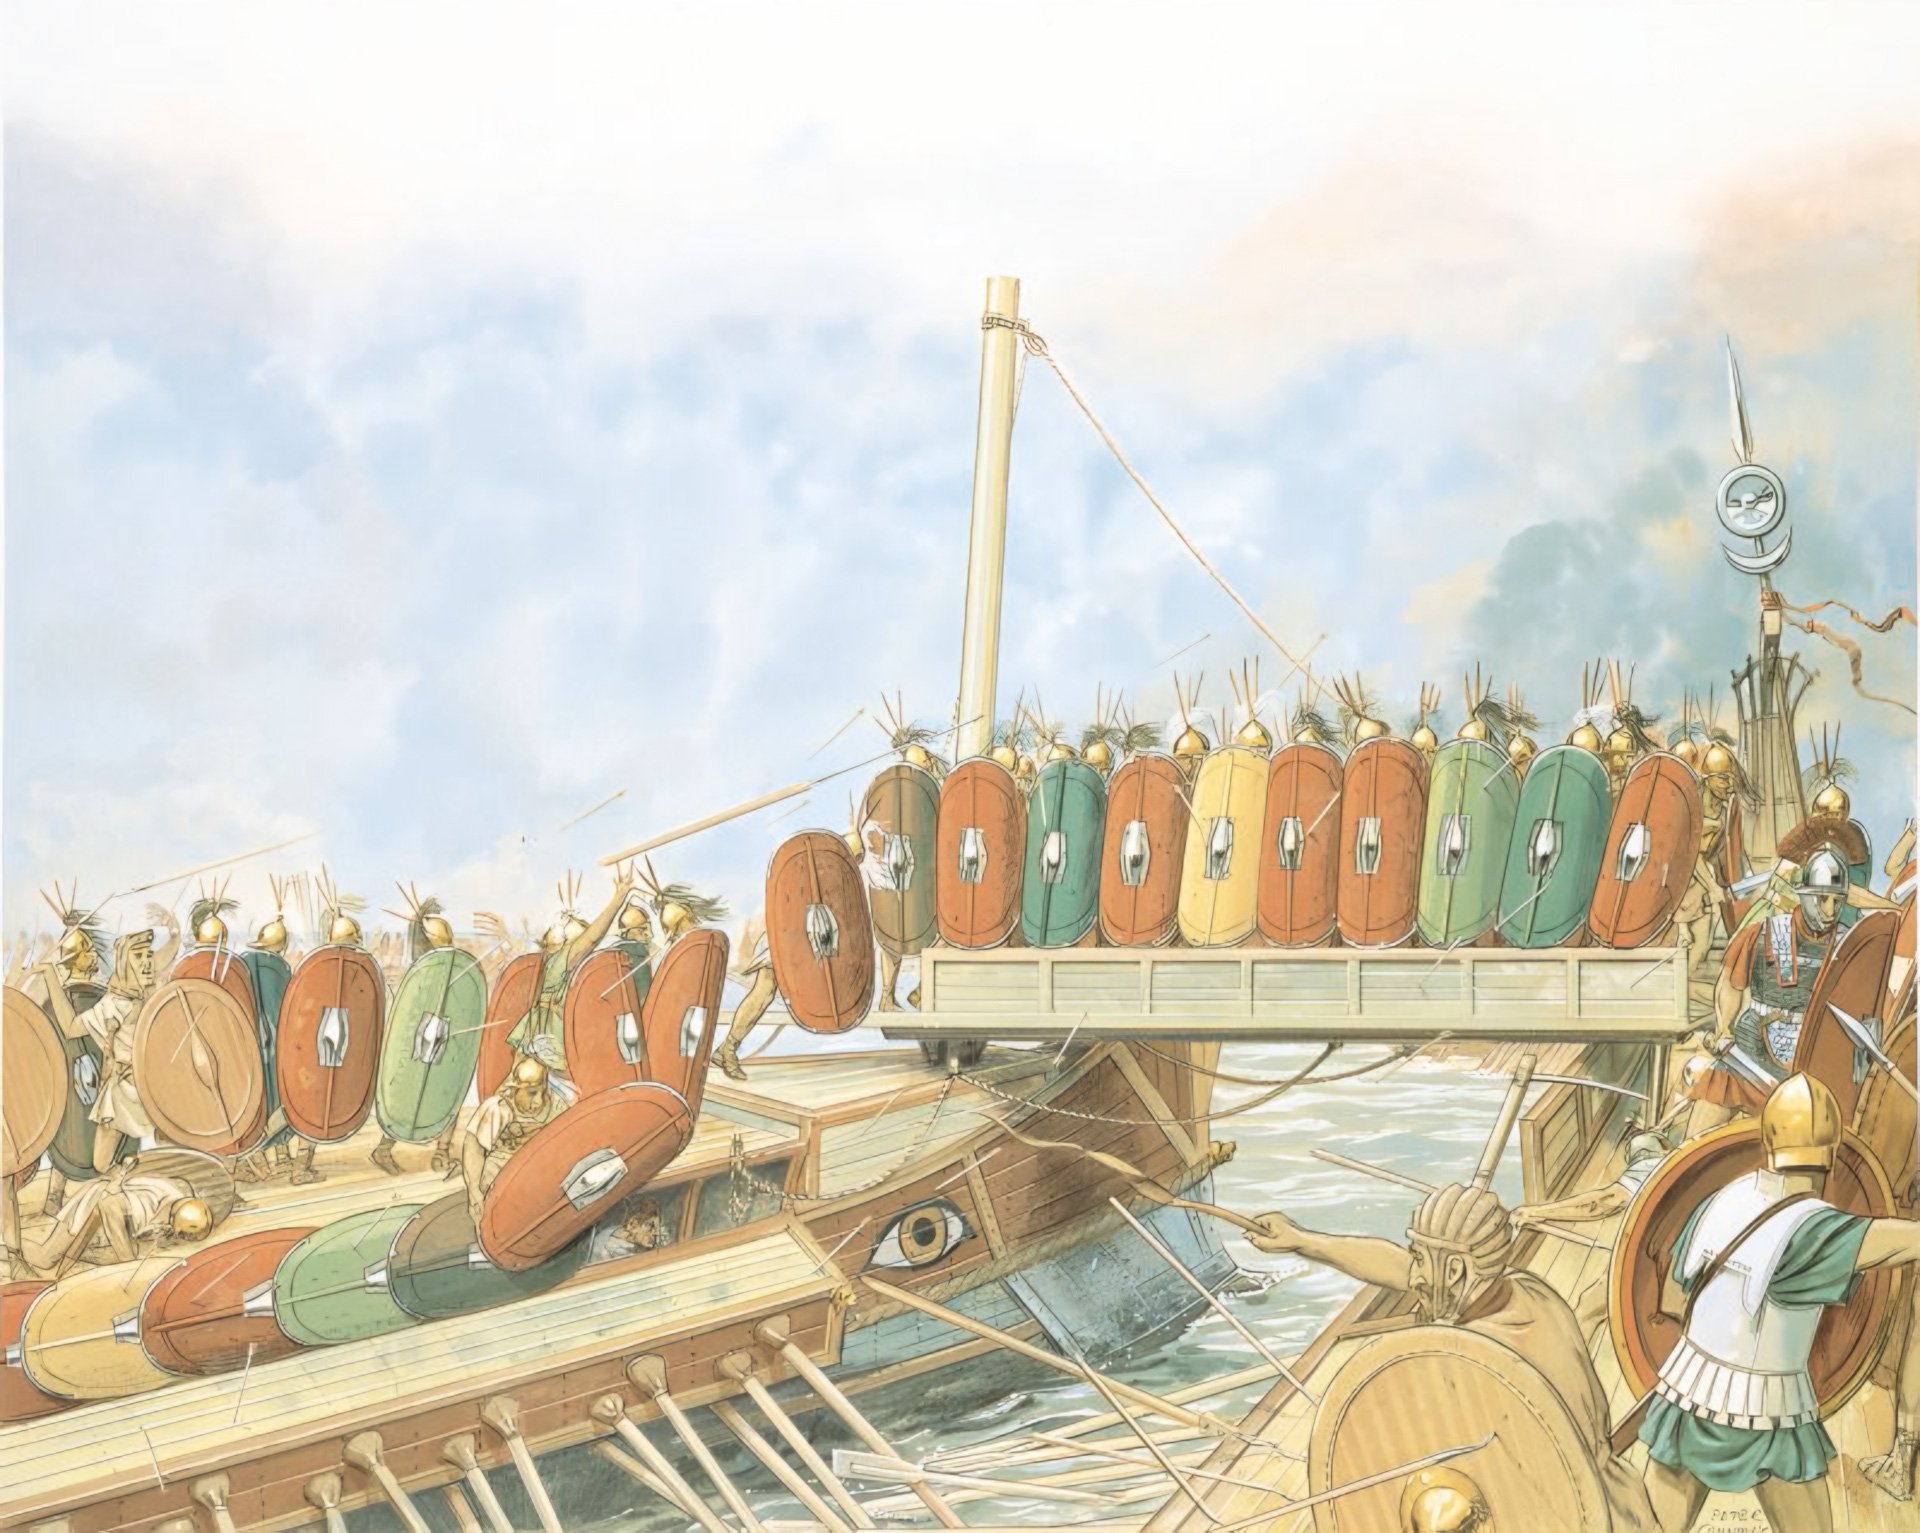 Roman soldiers advance in disciplined rank across a corvus, a rotatable and descending bridge that locked onto an enemy ship. Its spike is seen at the right.